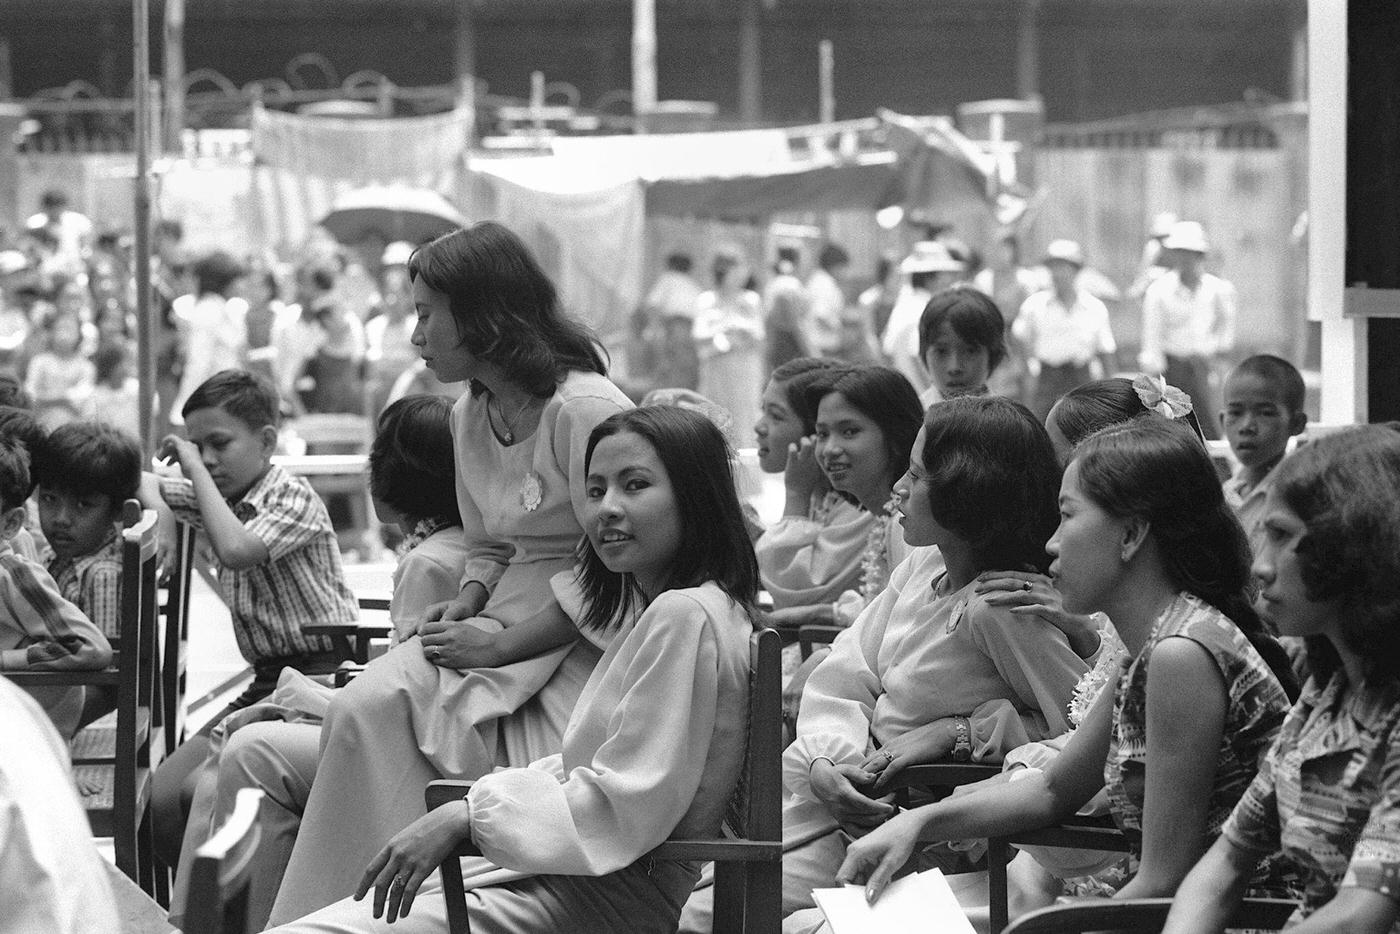 Burmese Young Dancers Get Prepared During the New Year Day in Rangoon, 1980